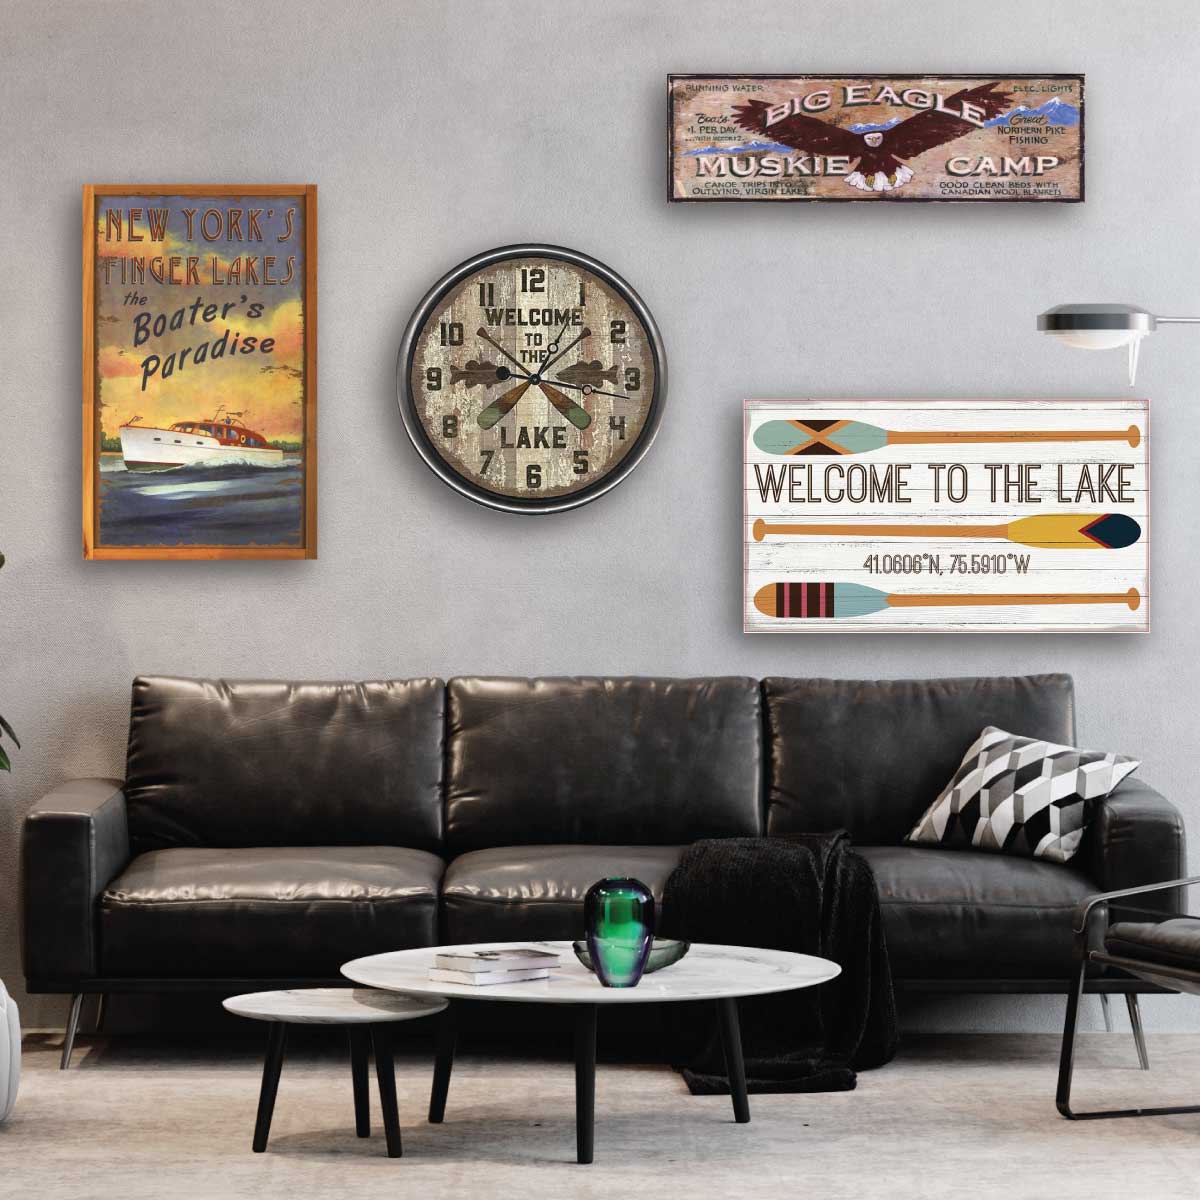 Wall decorations art for lake and mountain cabins; soaring eagle, welcome to the lake, new york finger lakes, rustic clock